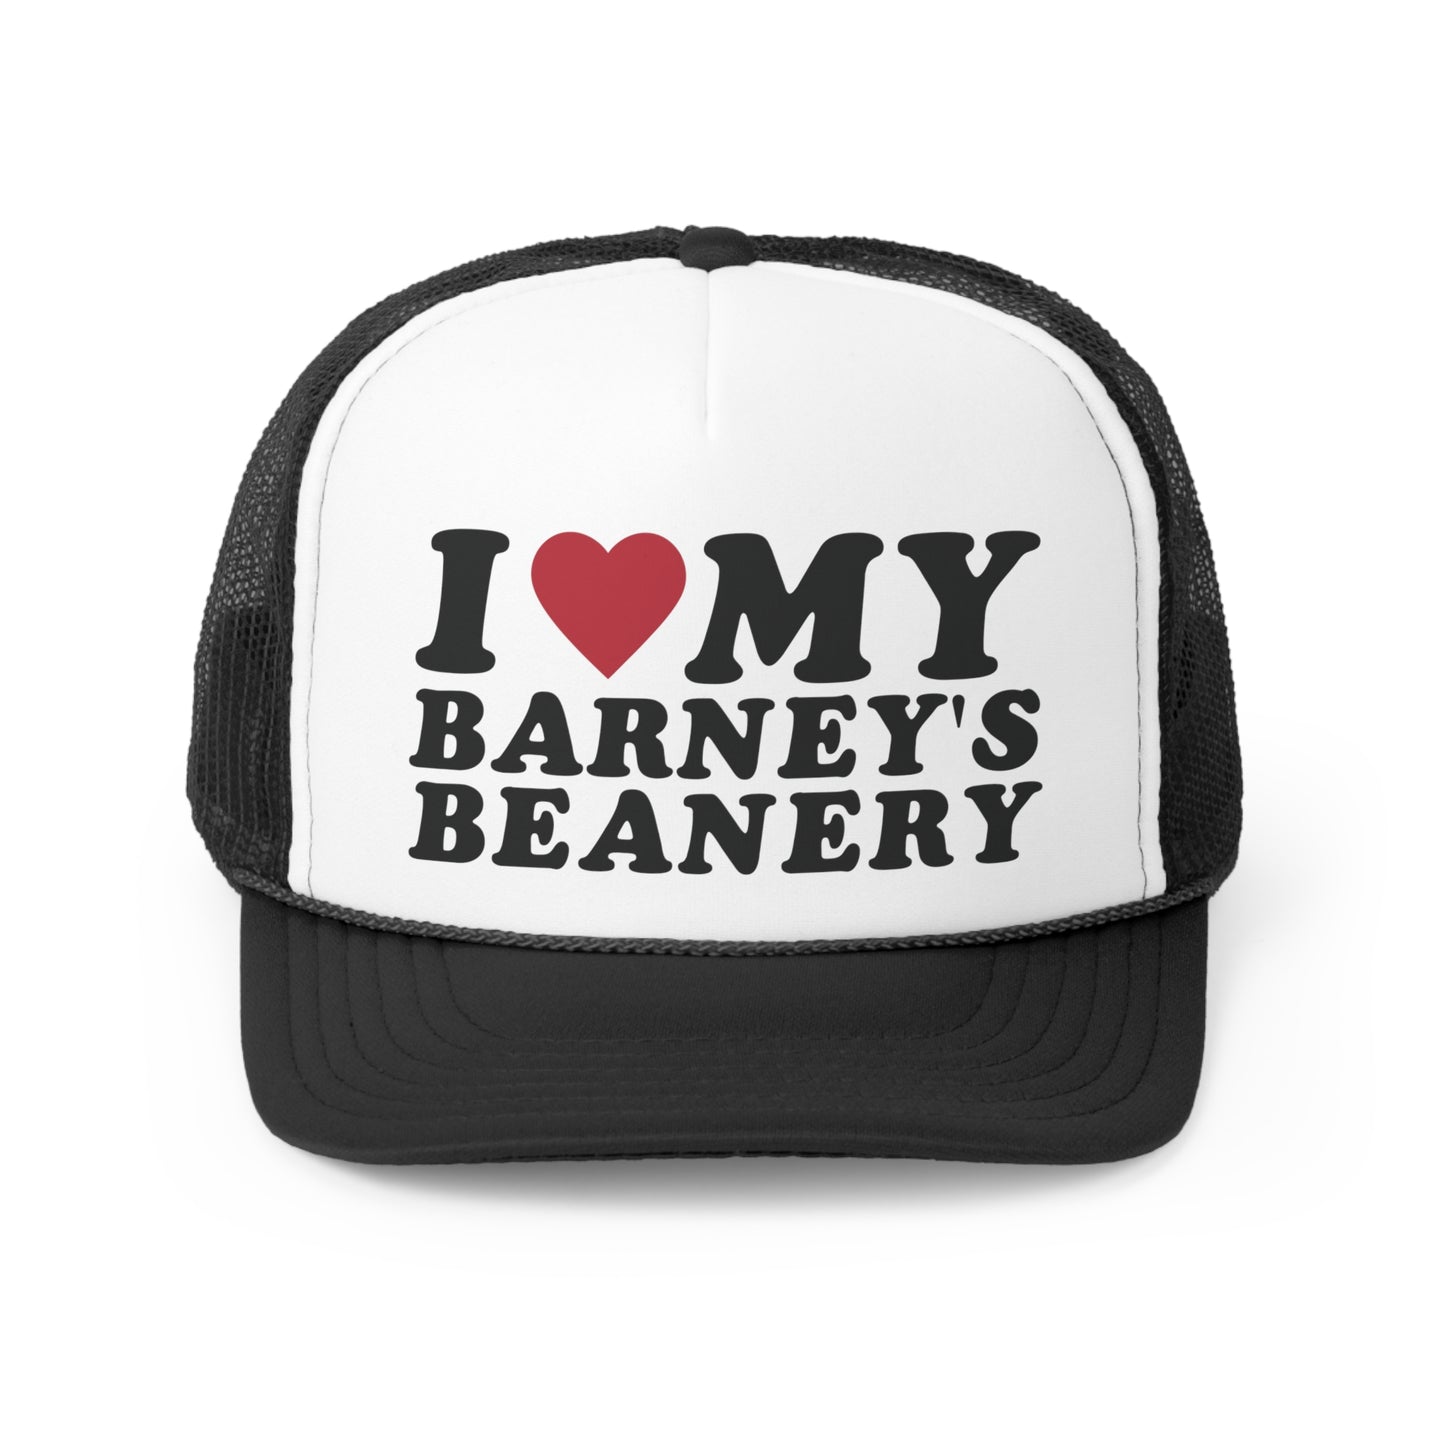 I Heart My | BARNEY'S BEANERY - Trucker Hat | Black And Red Graphic On Black And White Trucker Hat, Front View